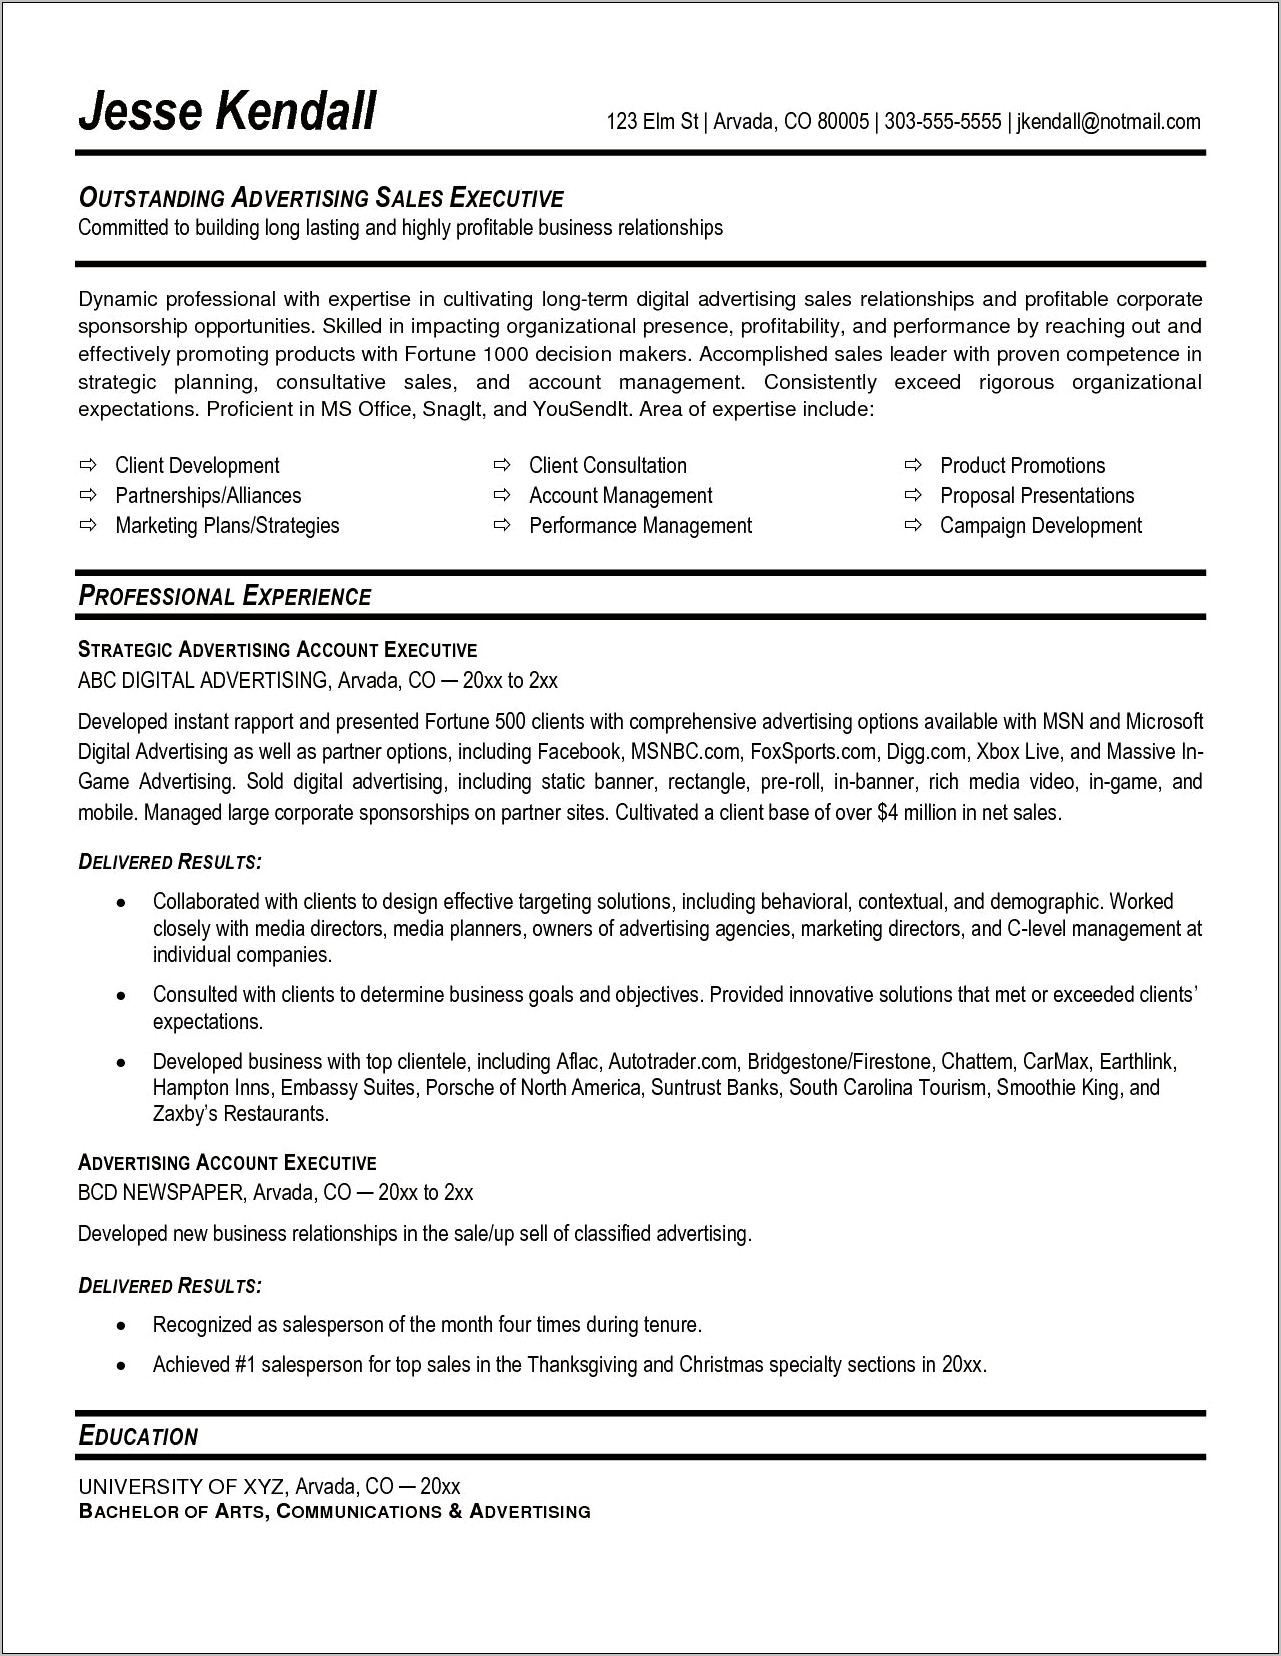 Kiosk Salesperson As A Manager Resume